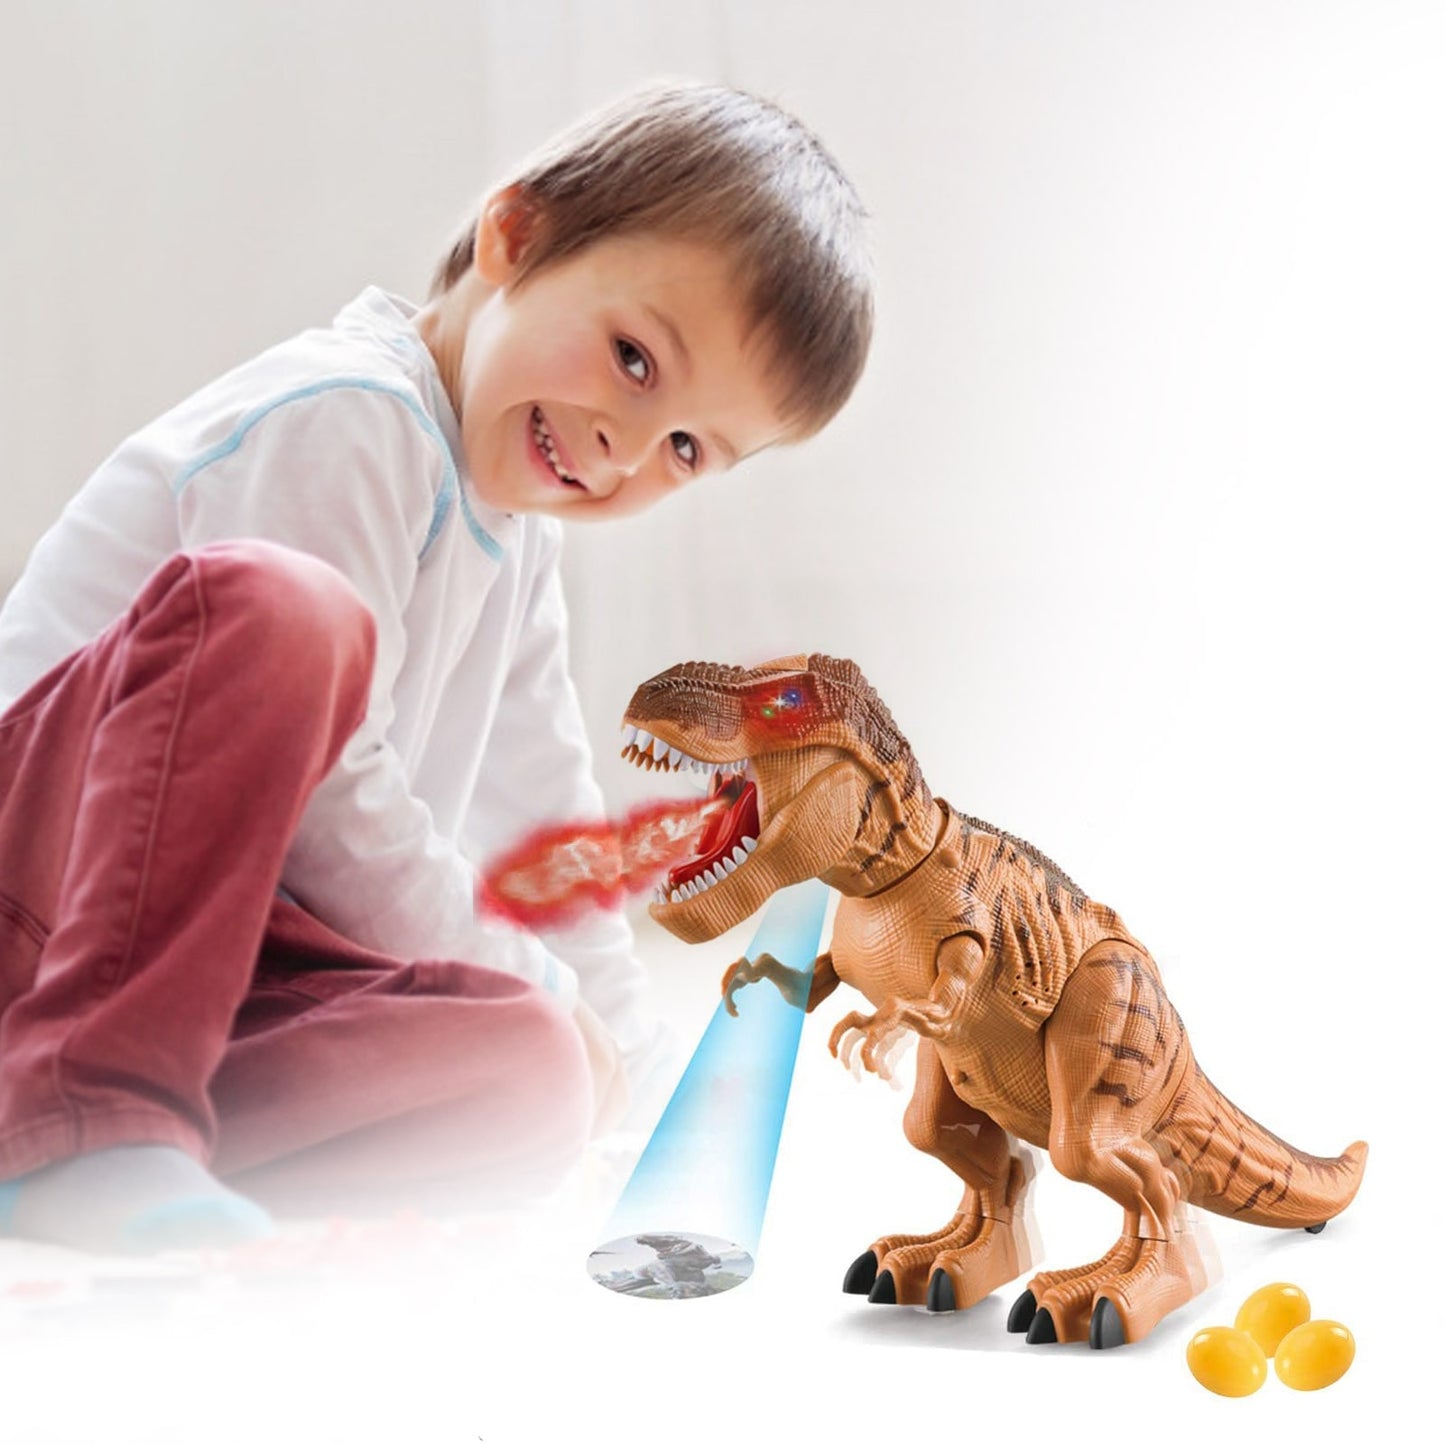 SimuRex | Realistic T-Rex Toy with Water Spray - Solutiverse